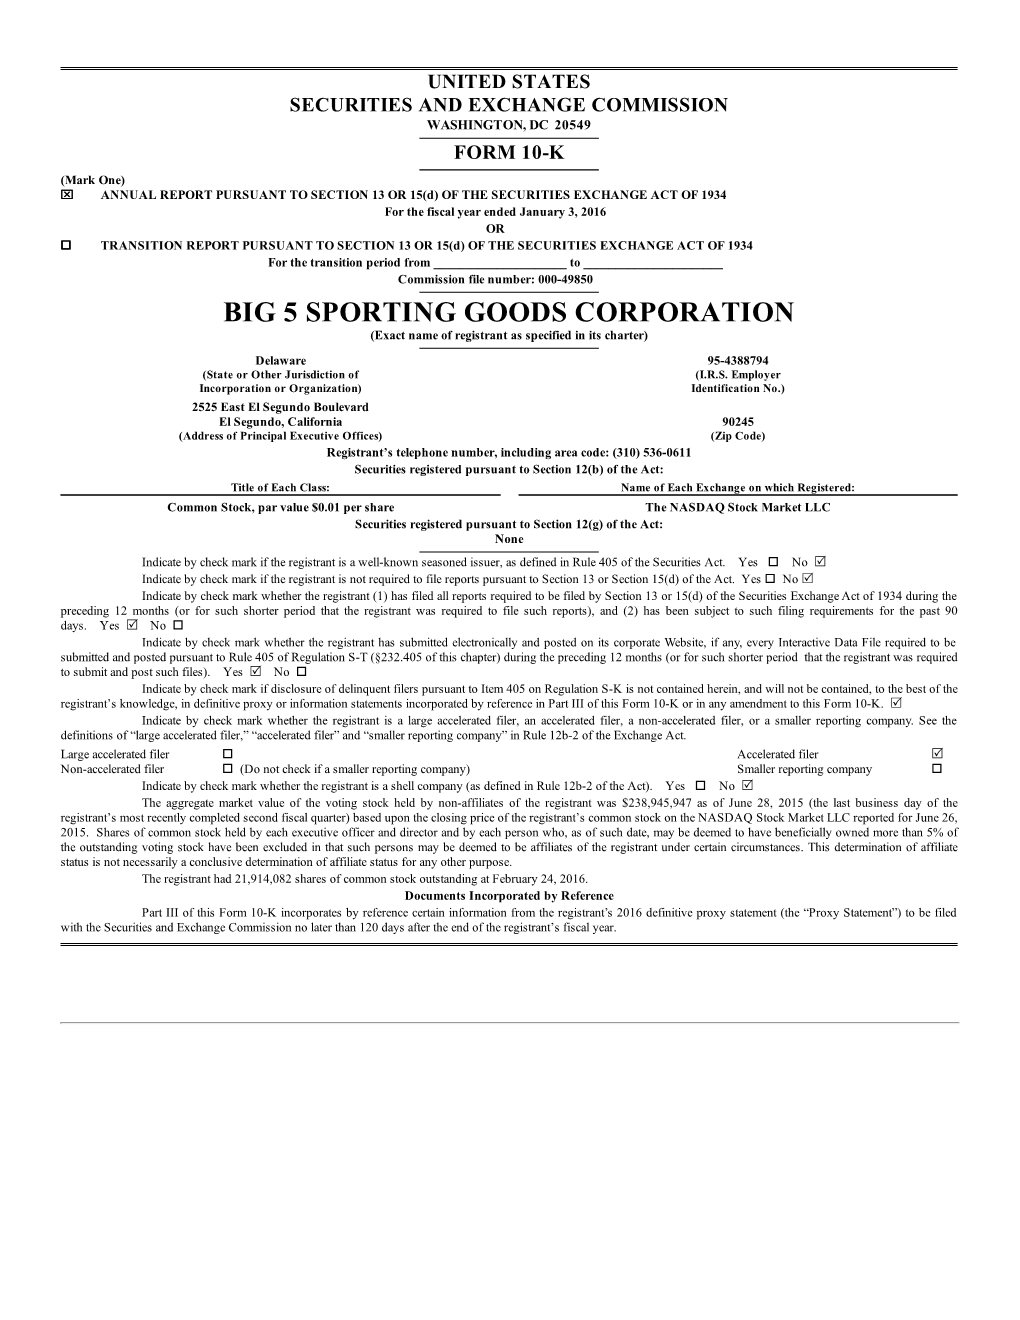 BIG 5 SPORTING GOODS CORPORATION (Exact Name of Registrant As Specified in Its Charter)